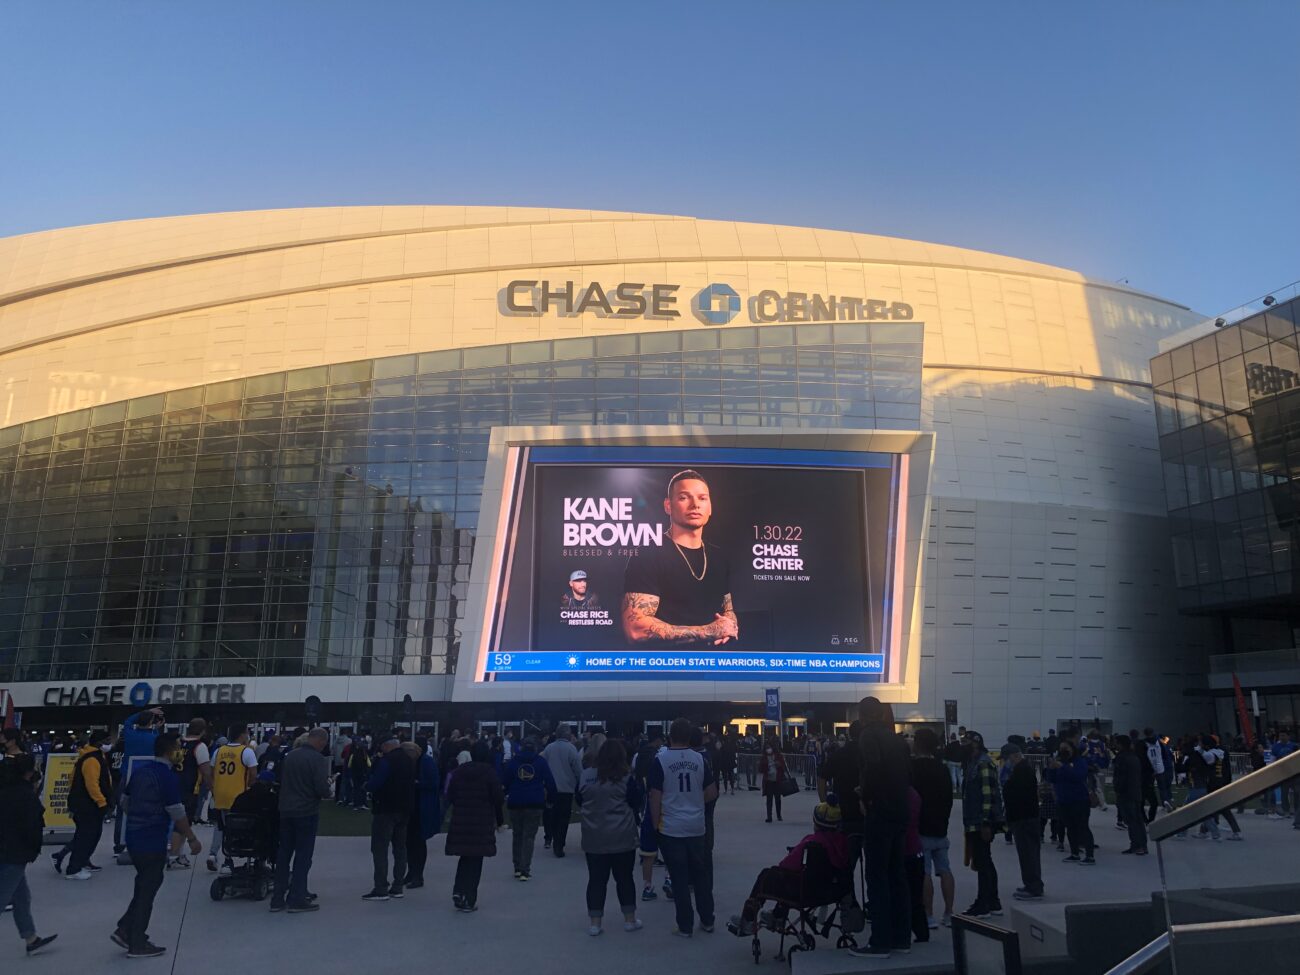 Chase Center - All You Need to Know BEFORE You Go (with Photos)